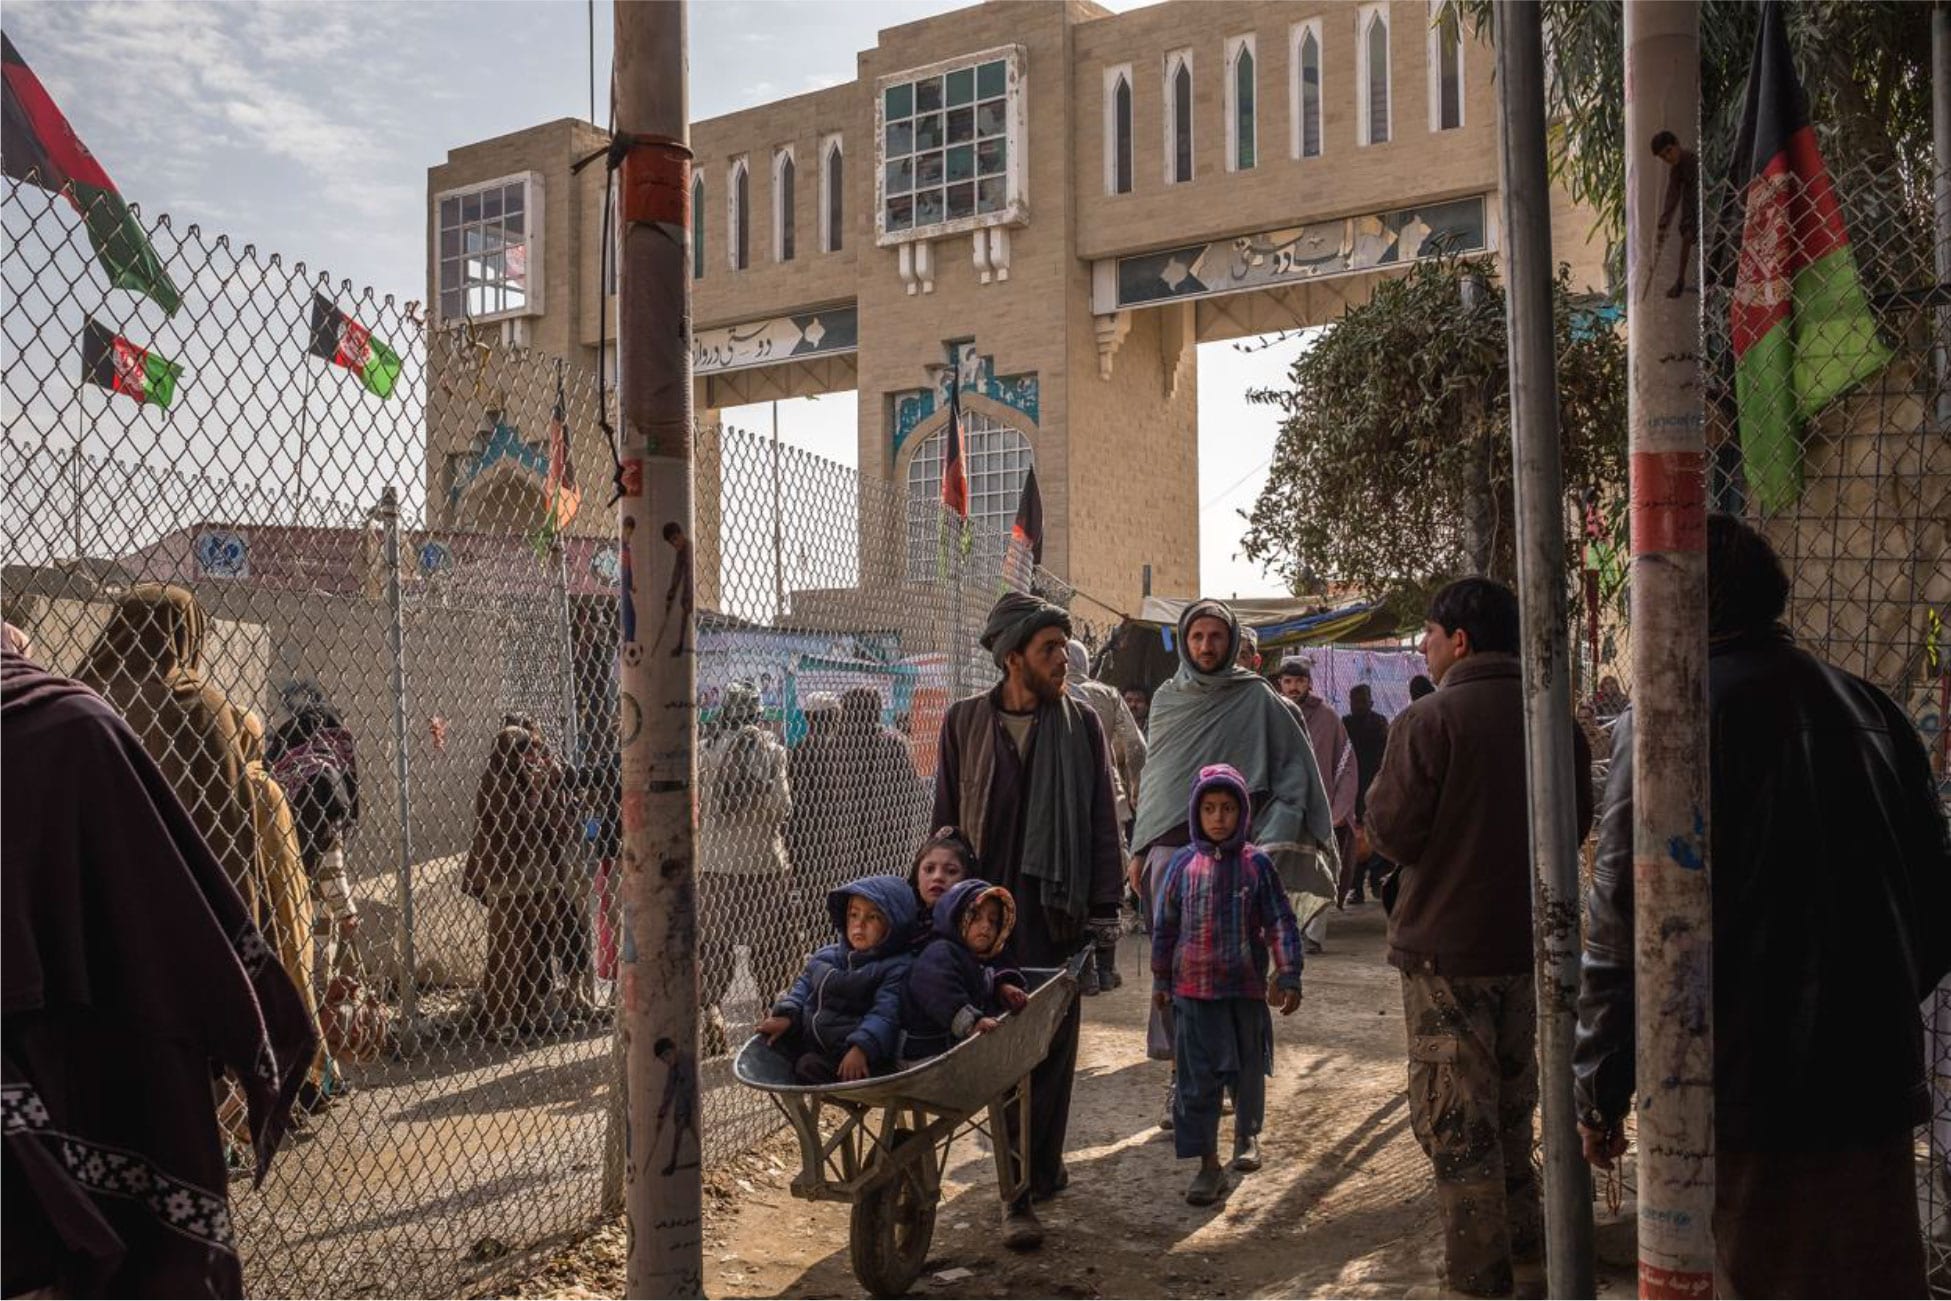 Friendship Gate - a border crossing between Afghanistan and Pakistan